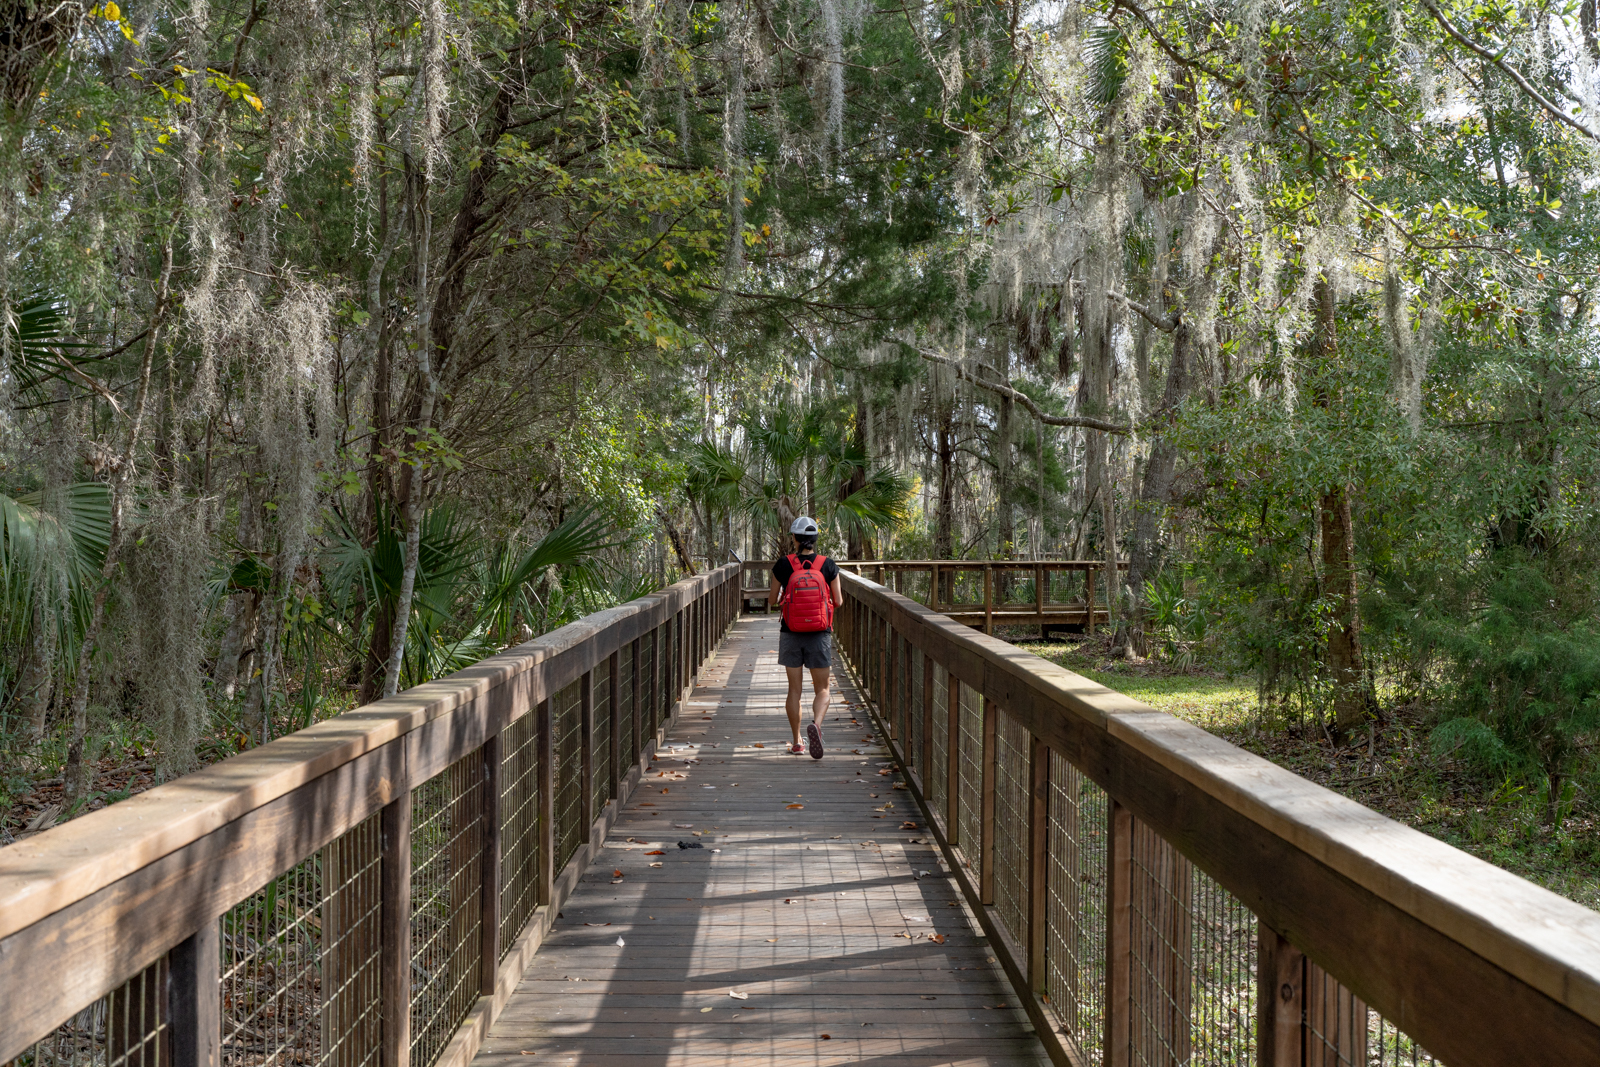 Erin McGrady walks down a wooden boardwalk wearing a red backpack. She is on the right-hand side of the path. There are handrails on each side and all around her are green trees and hanging moss.